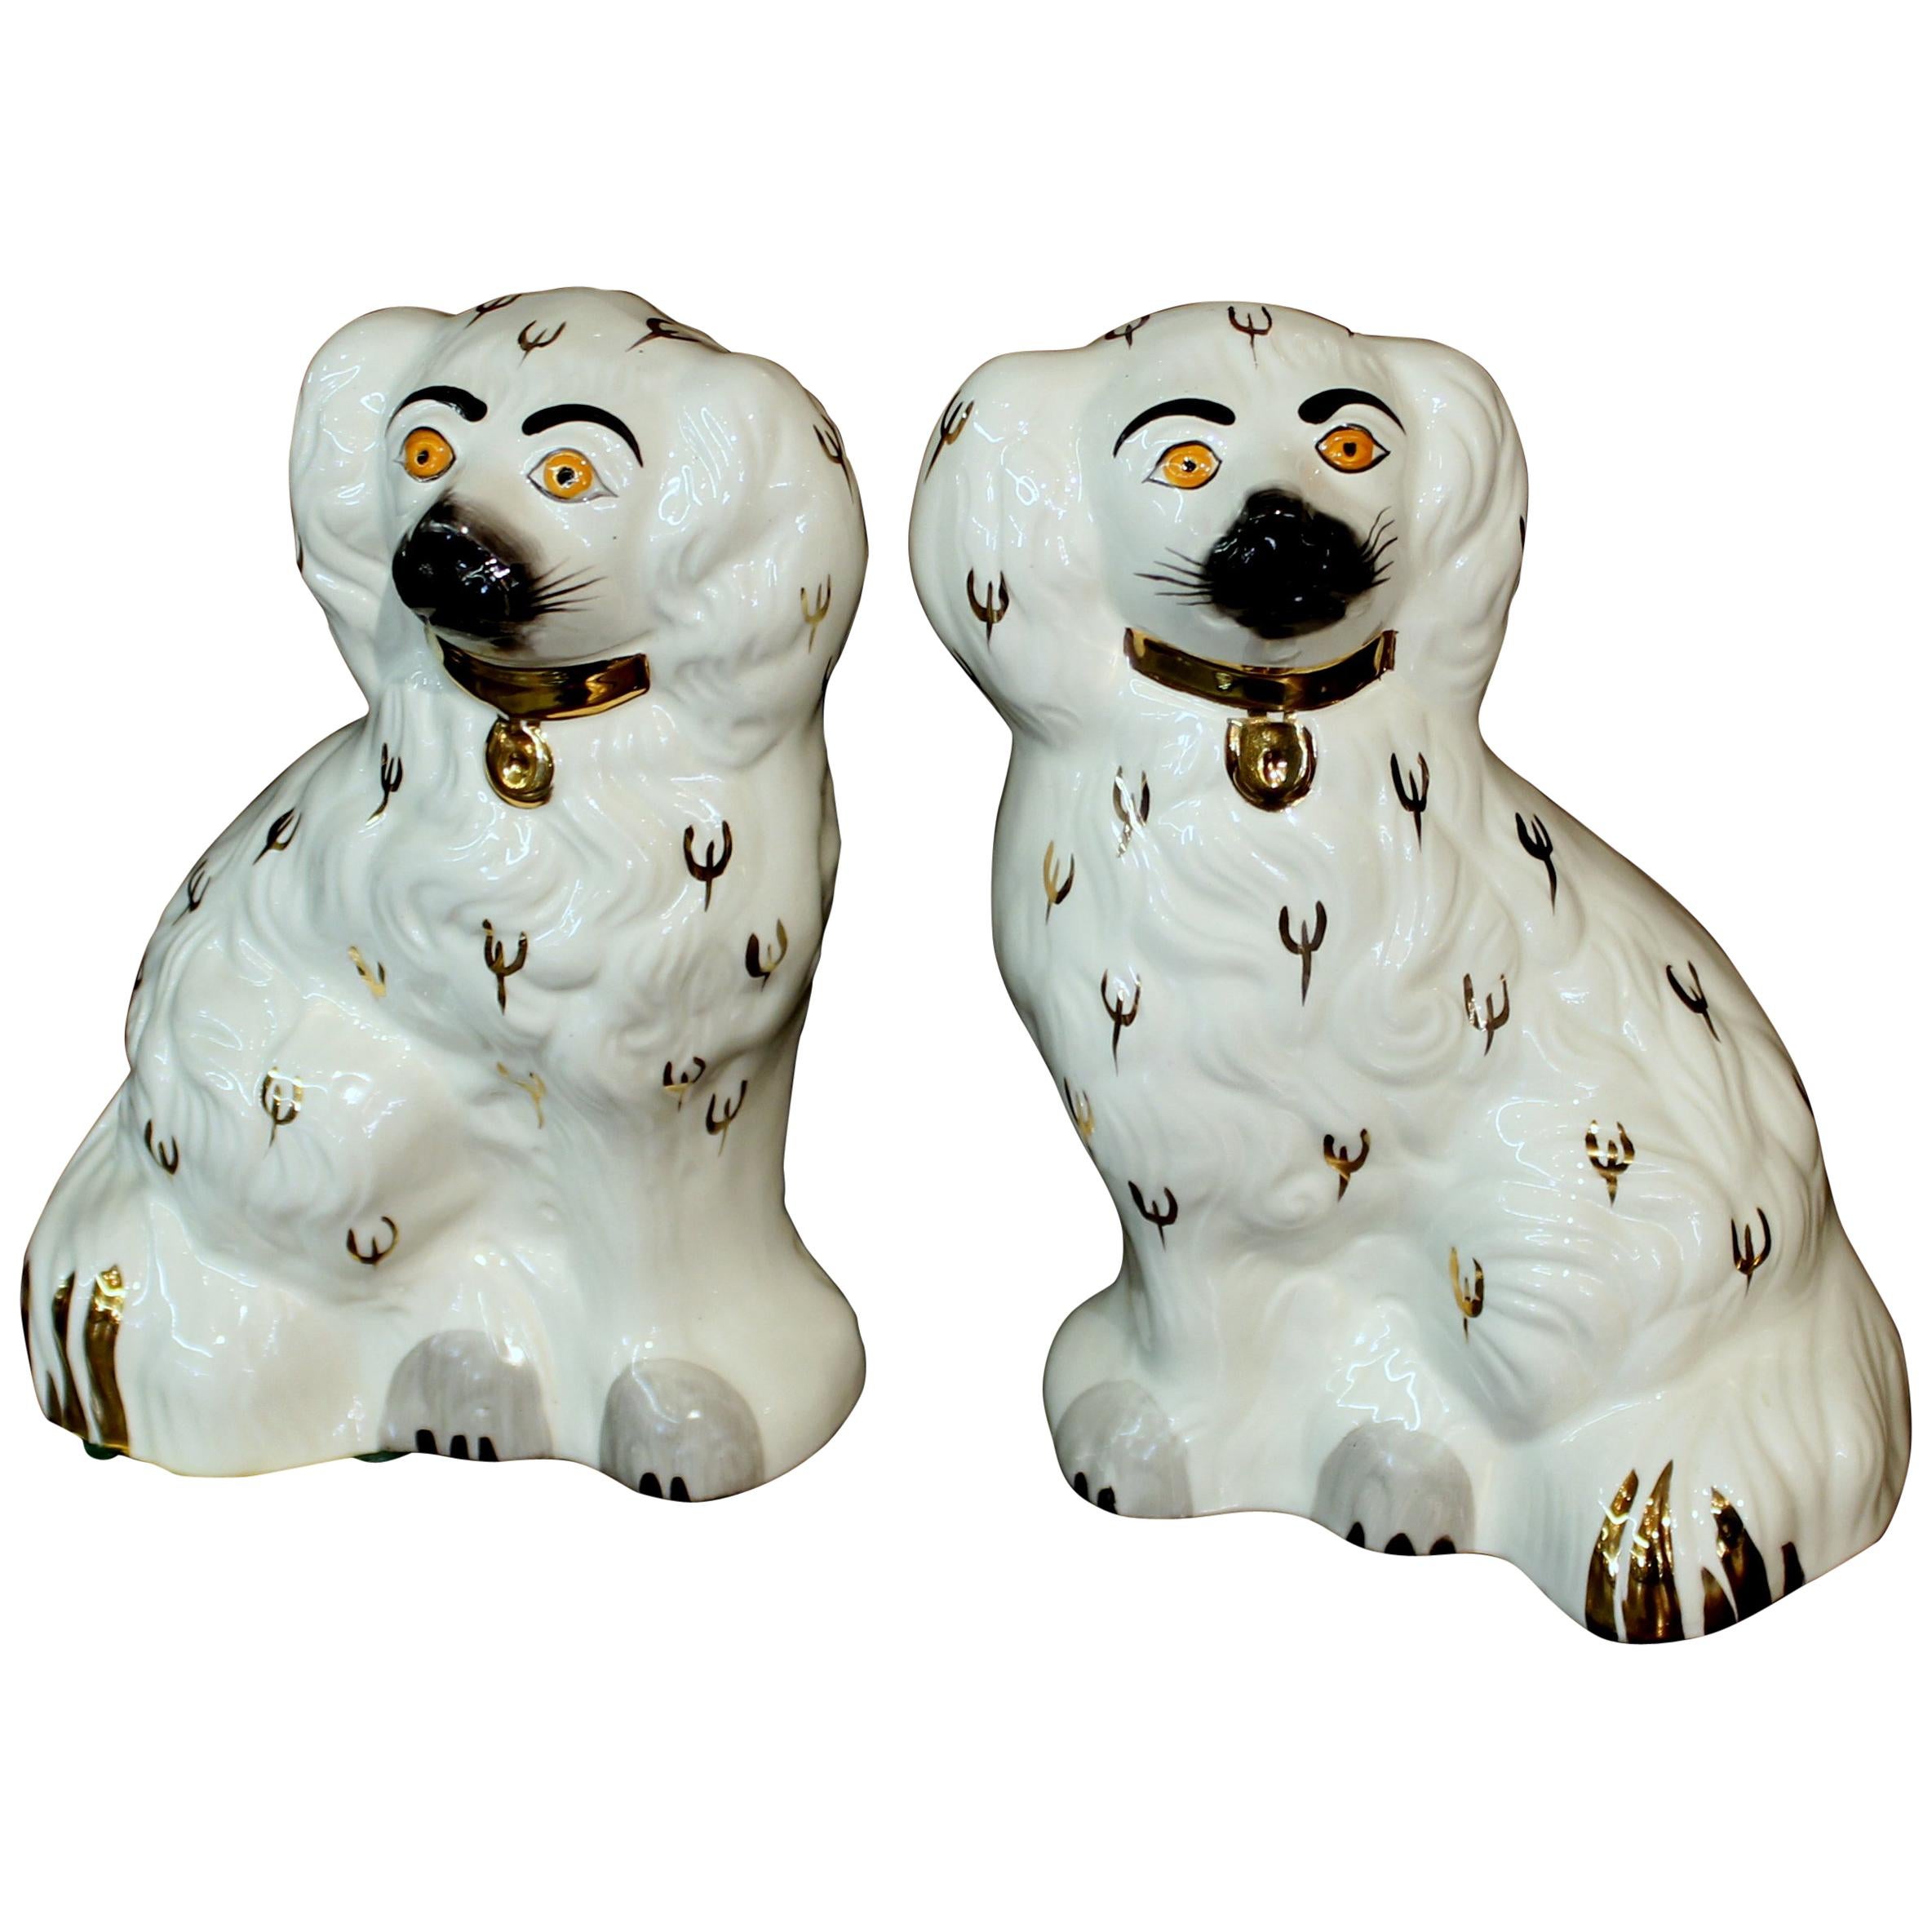 Pair of English Beswick Pottery "Staffordshire" Small Mantle Dogs